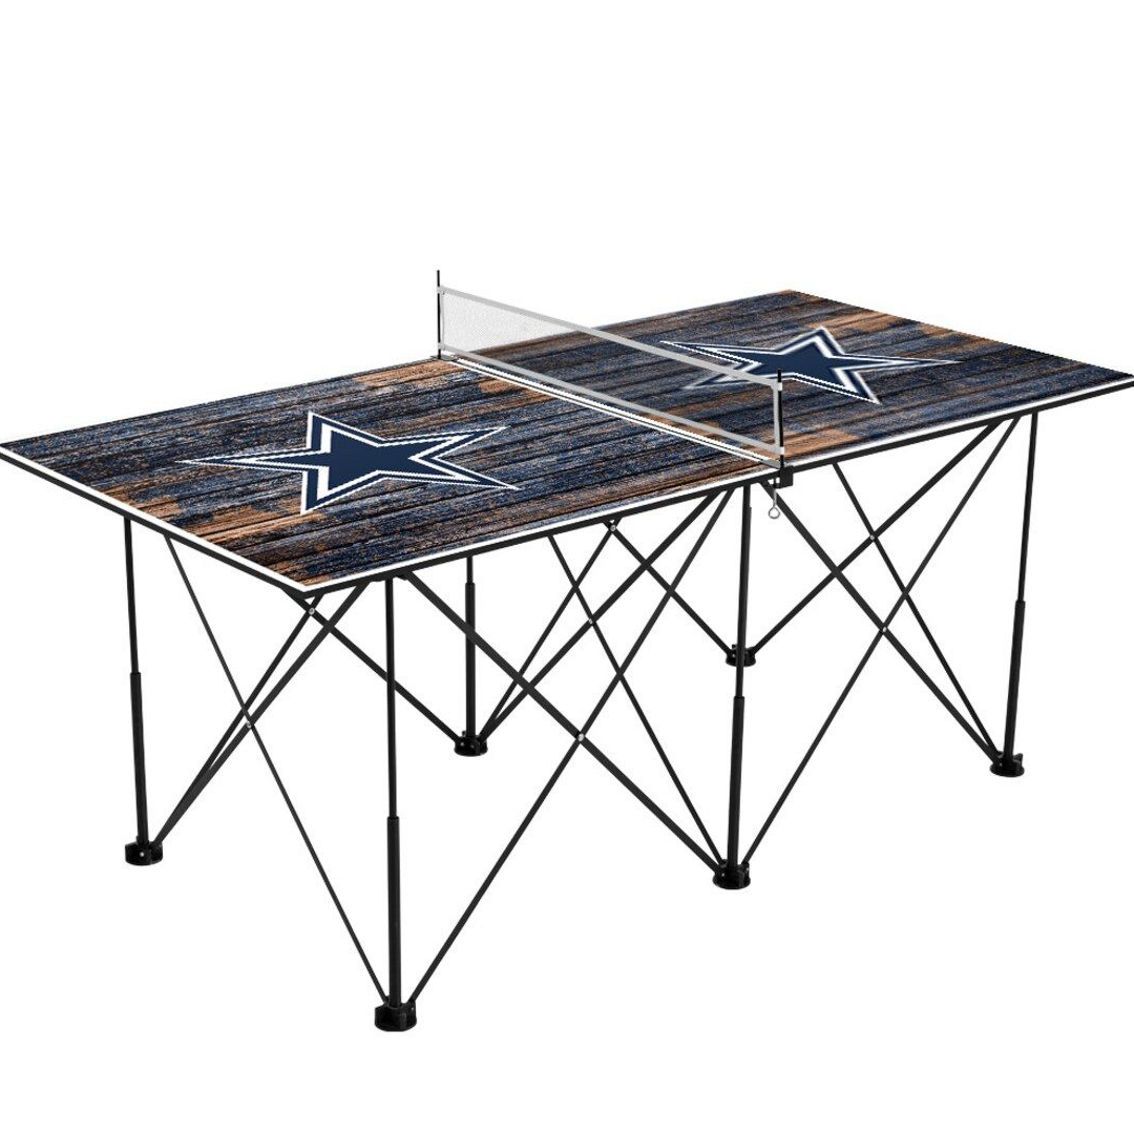 Victory Tailgate Dallas Cowboys 6' Weathered Design Pop Up Table Tennis Set - Image 2 of 2